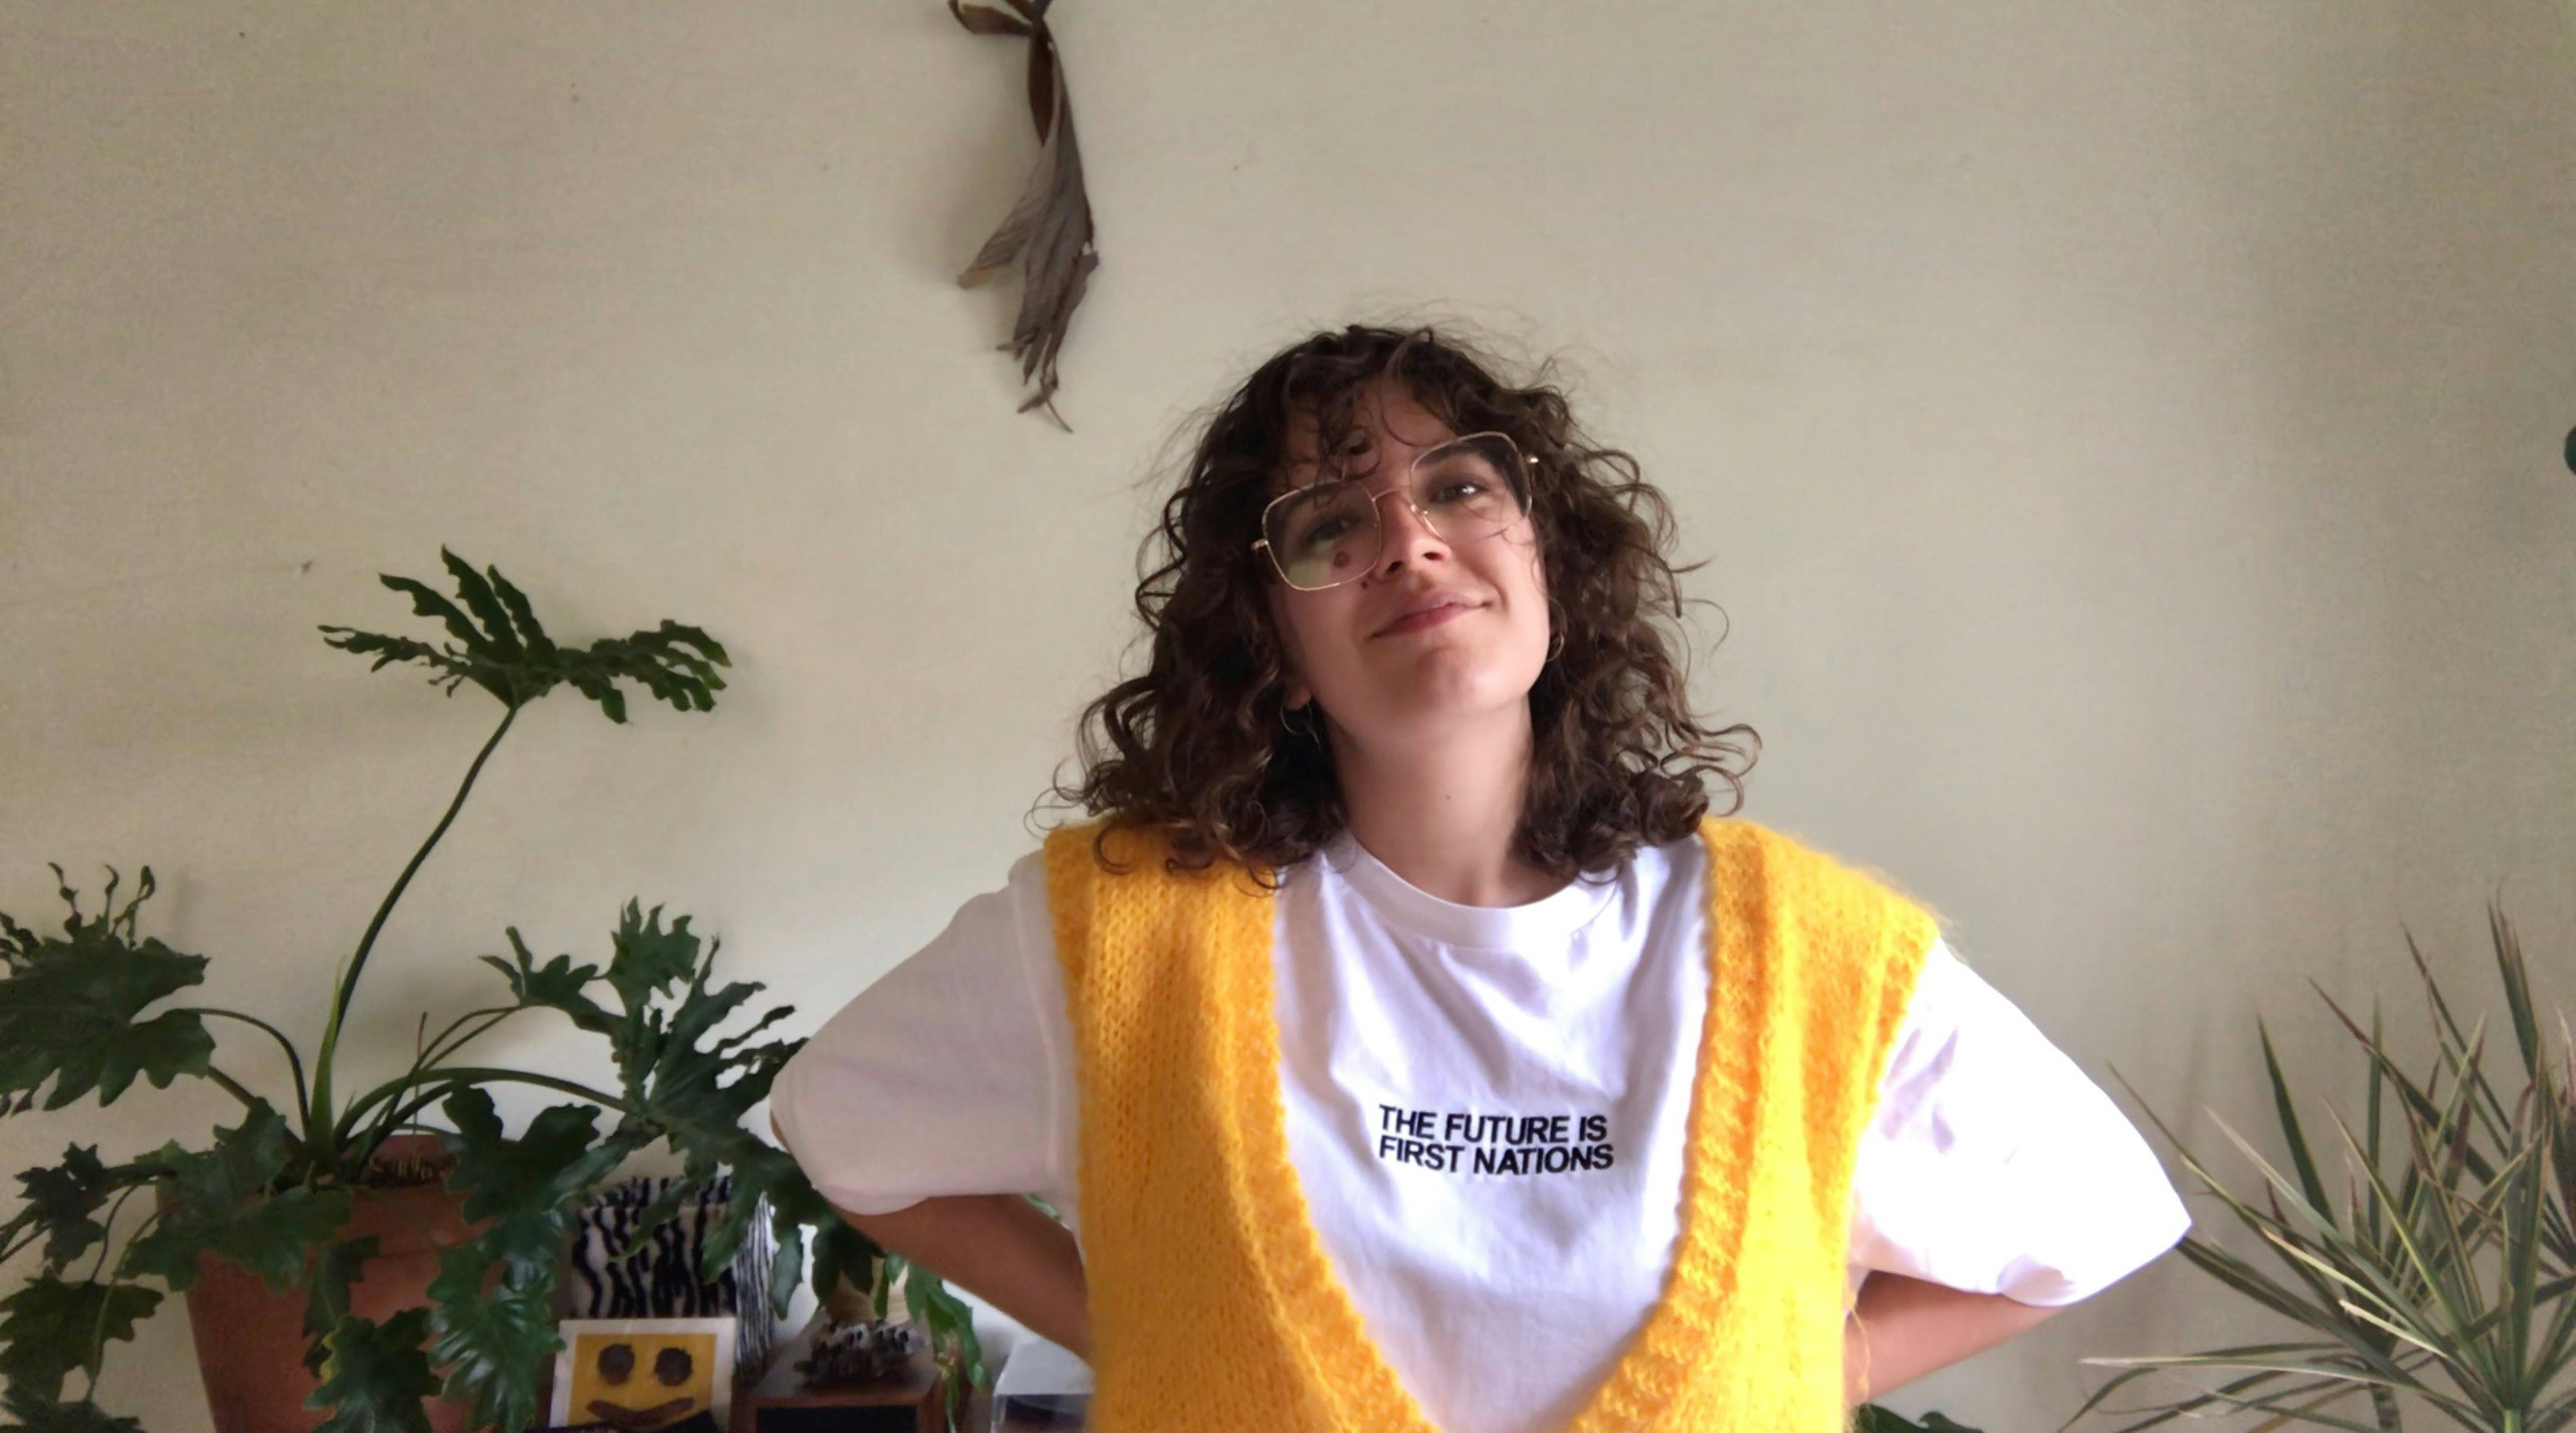 Pierra is standing in a room with their hands on their hips wearing a yellow vest and white T-shirt in front of some green plants